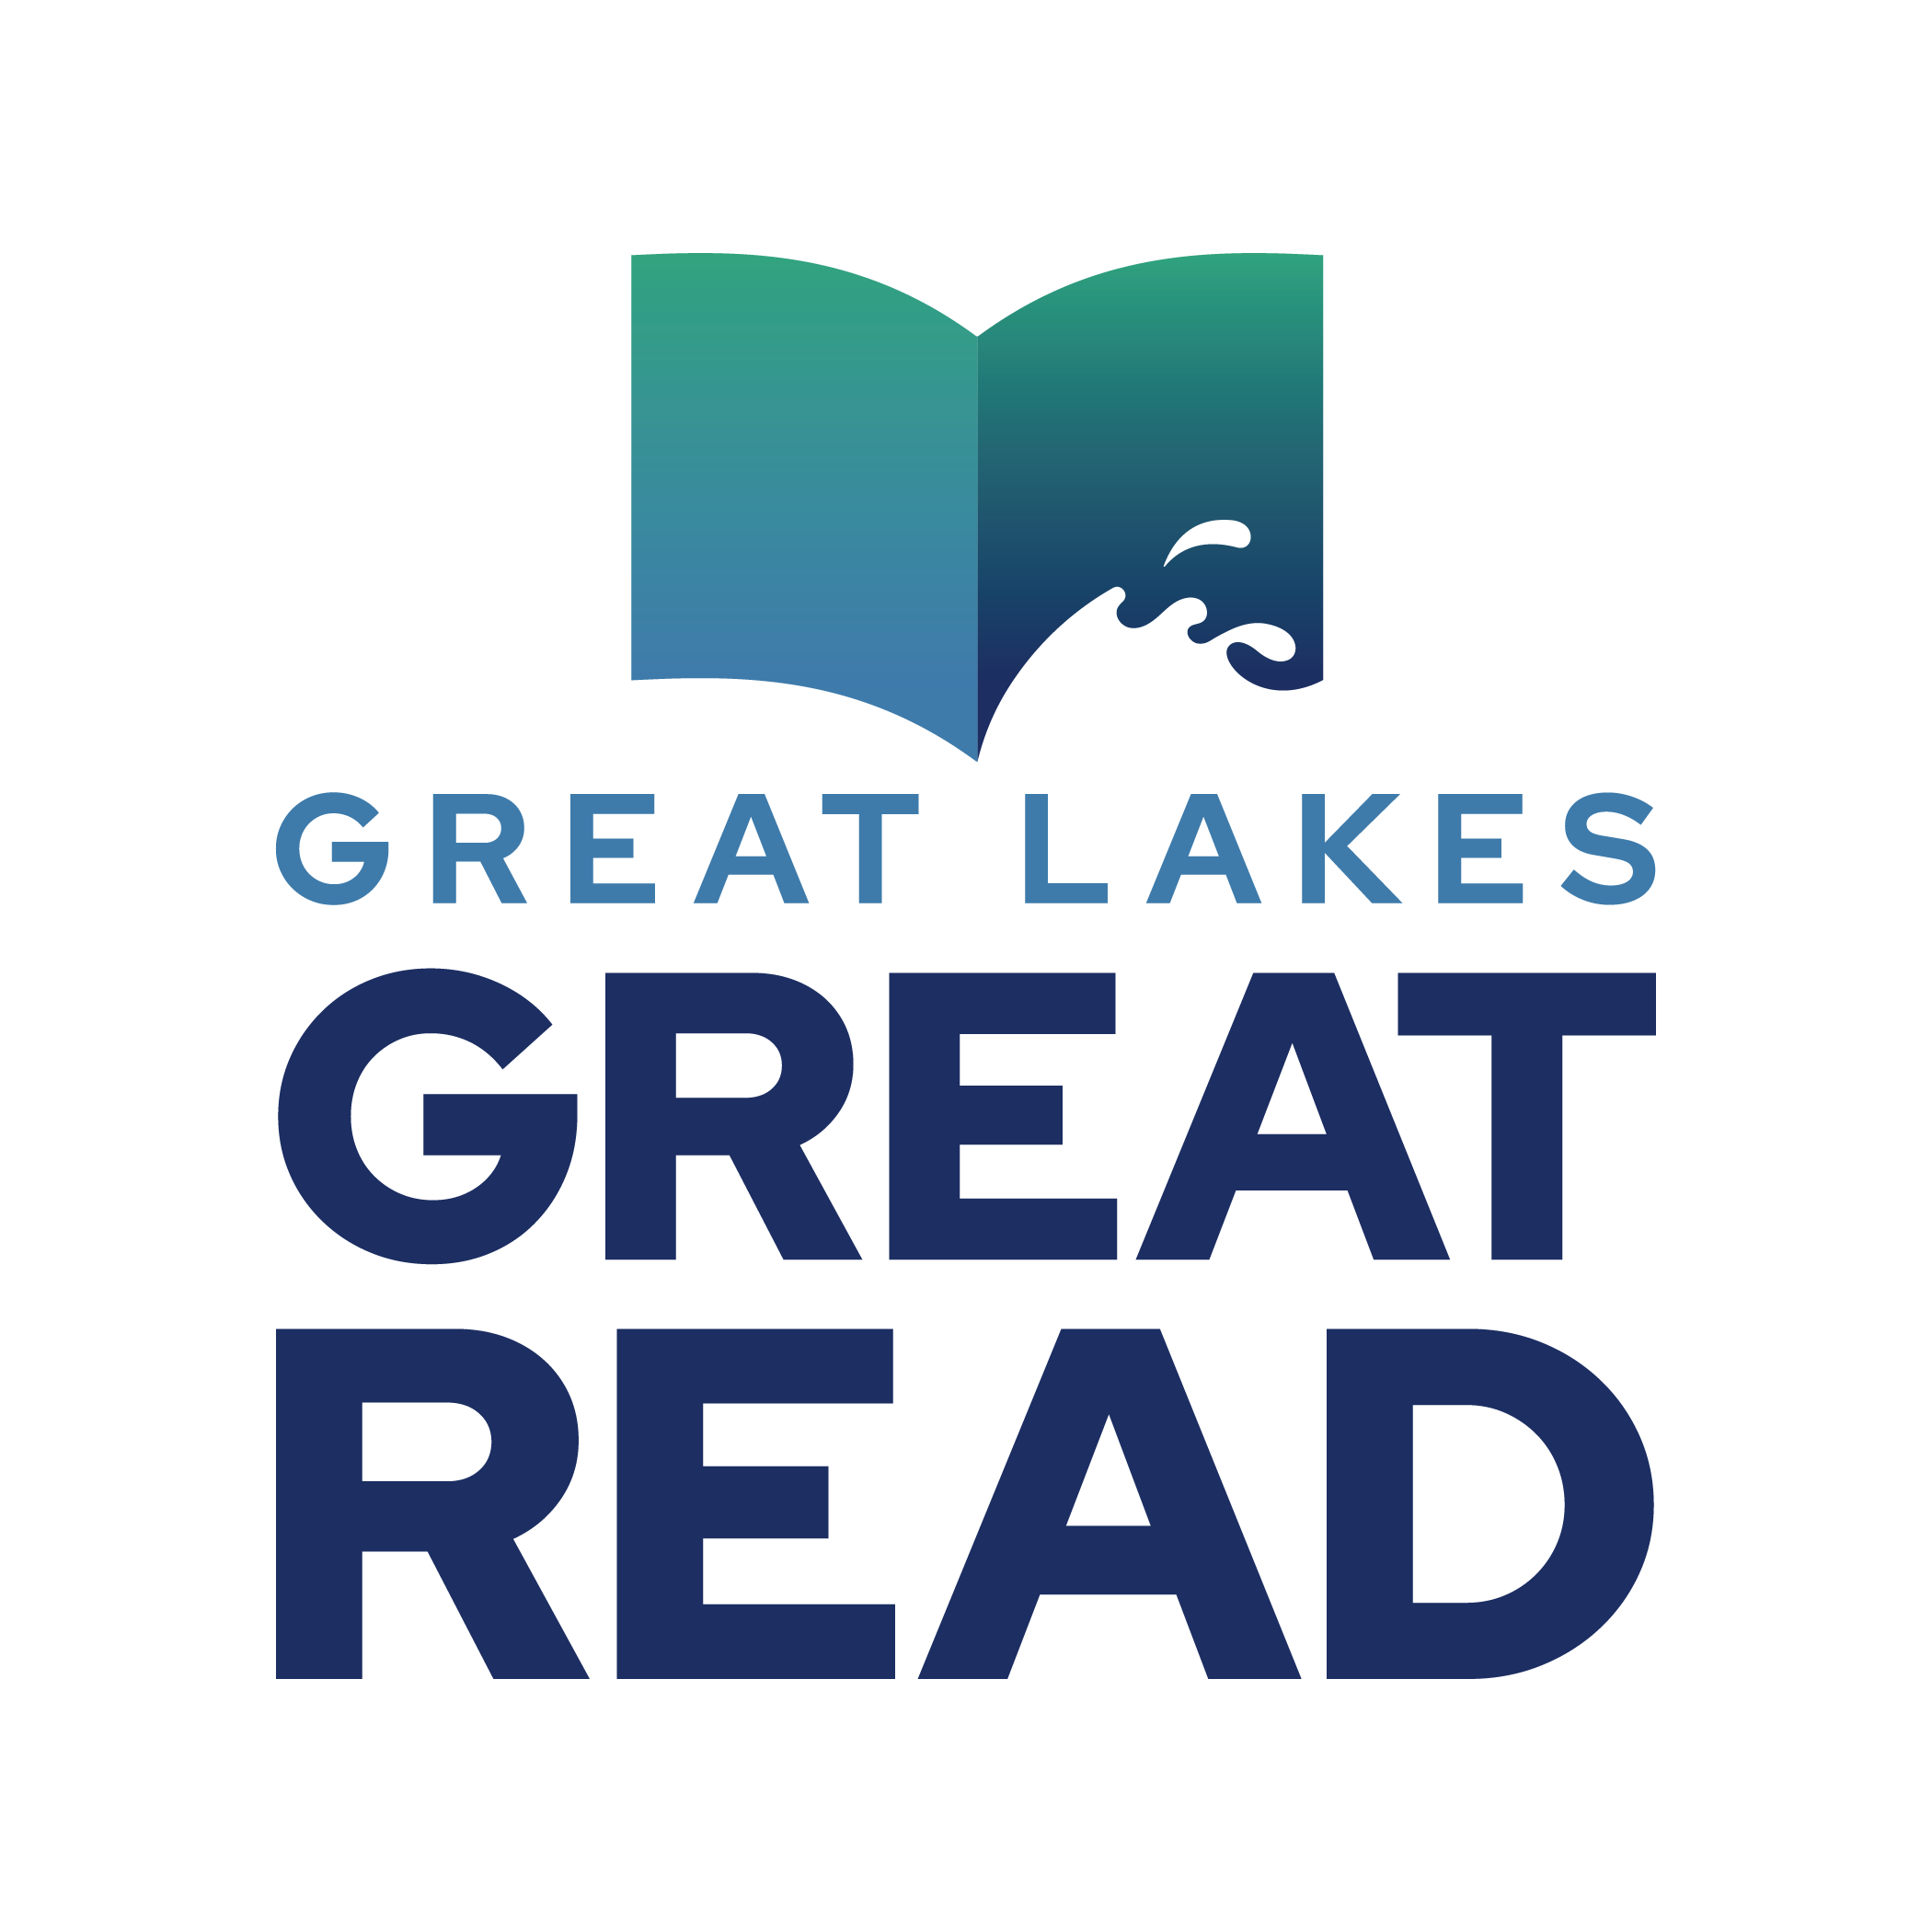 Image of a book with a wave on the cover that says "Great Lakes, Great Read"